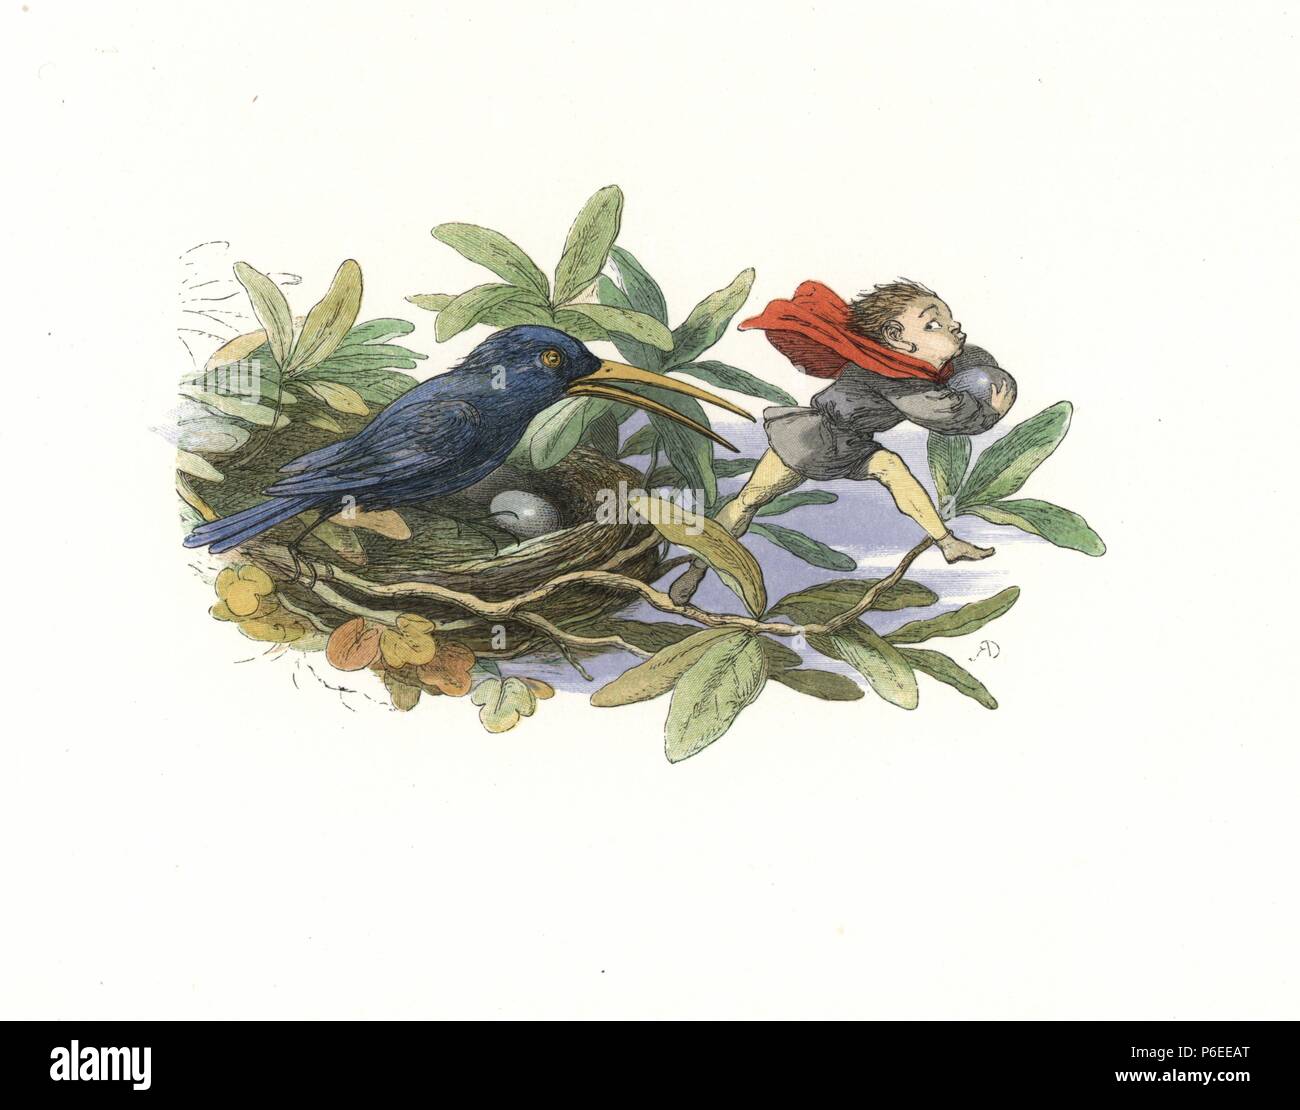 Elf stealing eggs from a bird's nest. Handcoloured woodblock print by Edmund Evans after an illustration by Richard Doyle from In Fairyland, a series of Pictures from the Elf World, Longman, London, 1870. Stock Photo